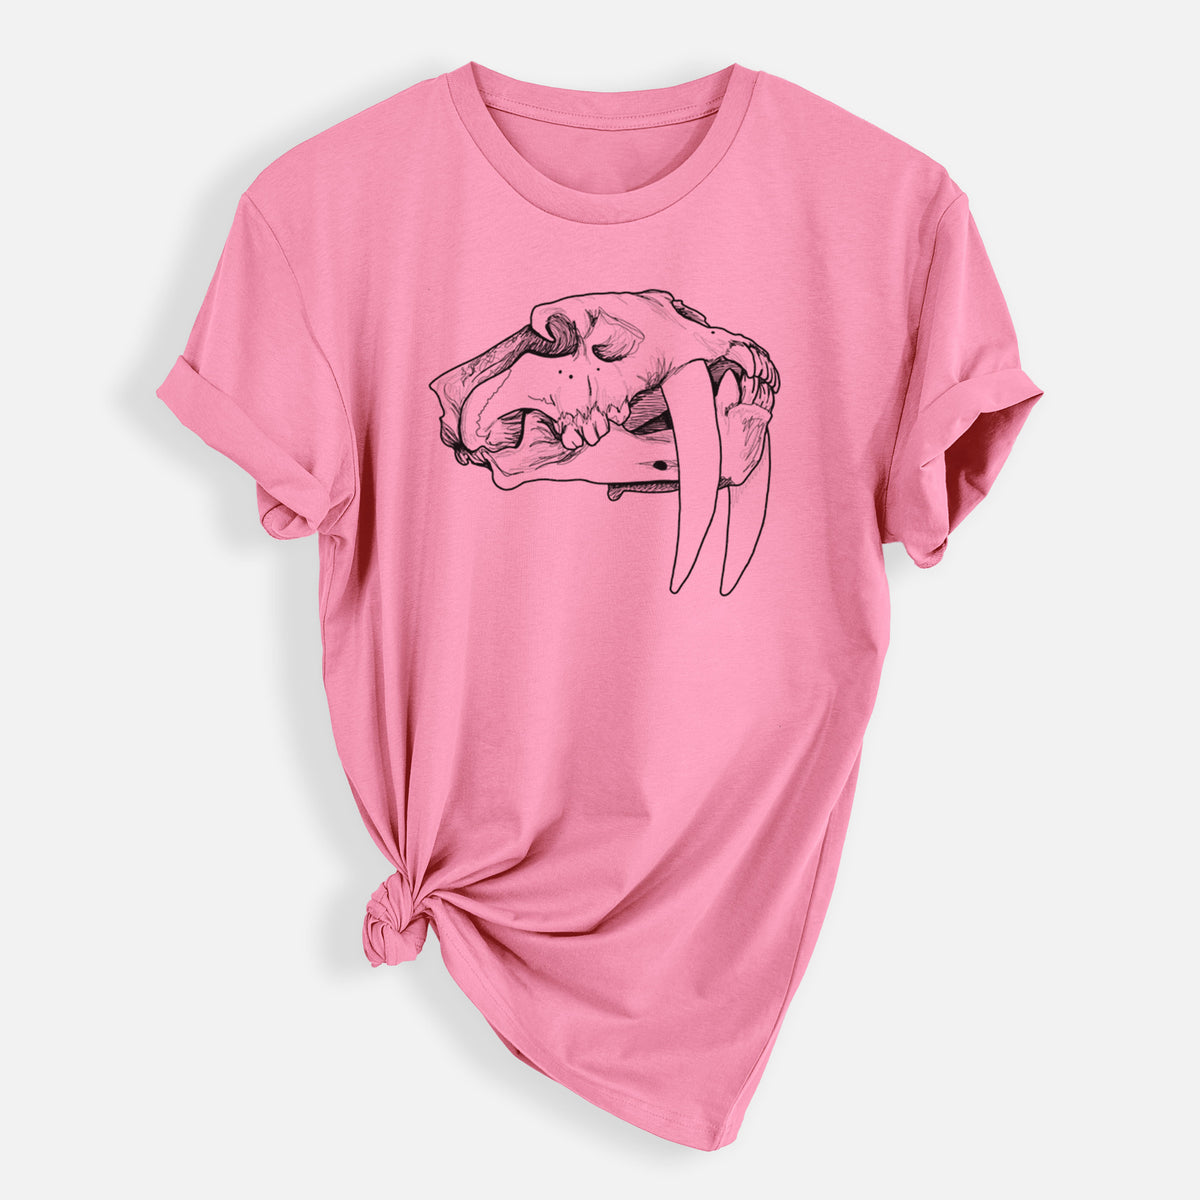 Saber-toothed Tiger Skull - Mens Everyday Staple Tee